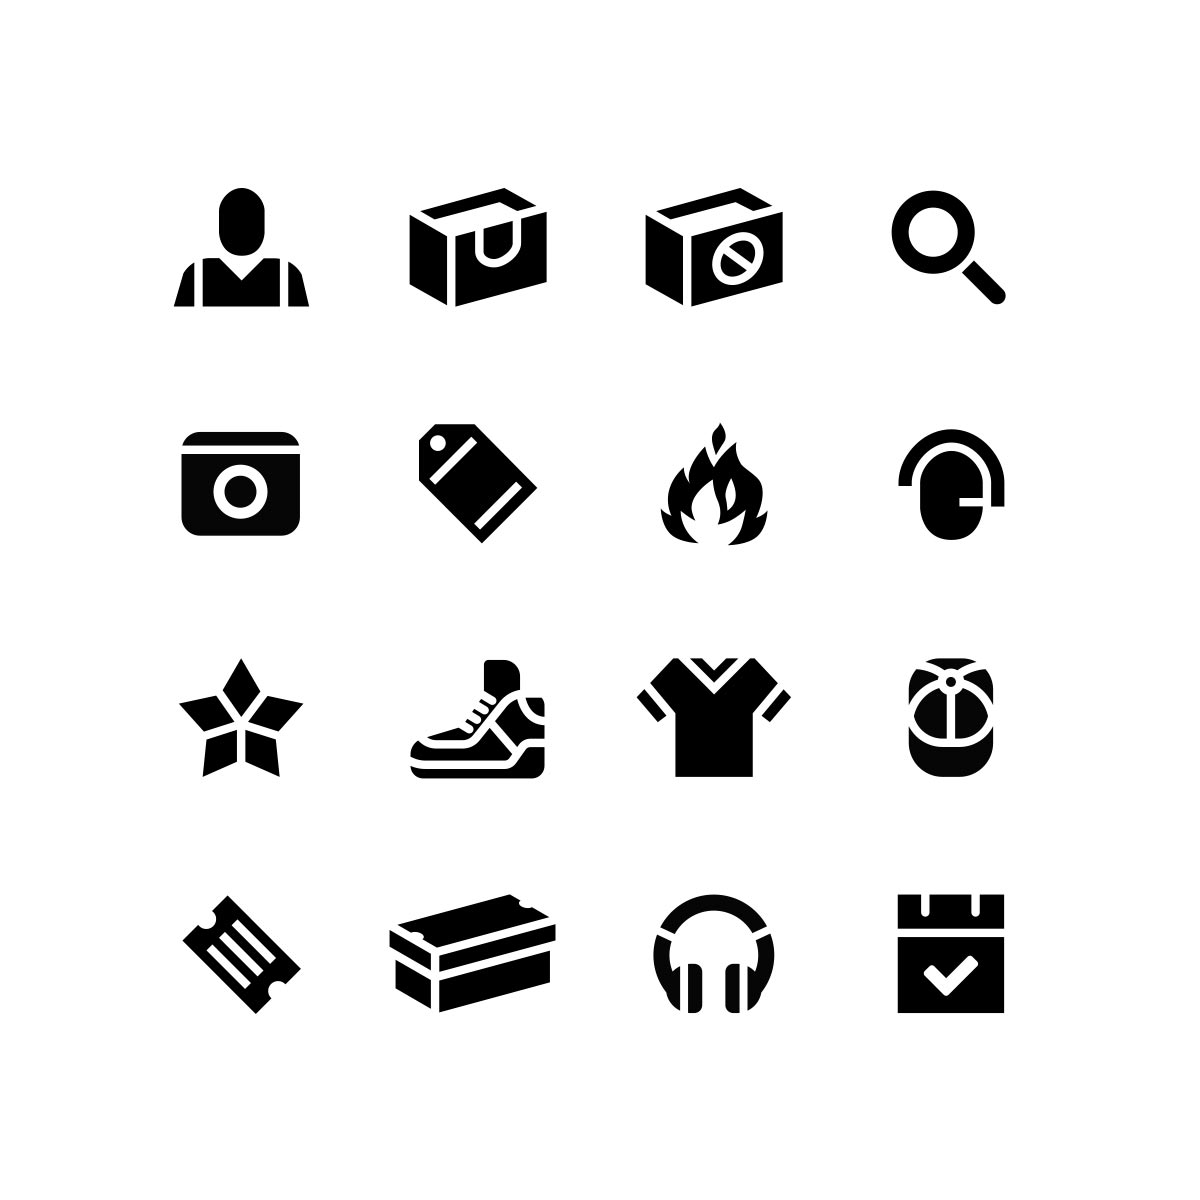 Icons and branding for Unknwn.